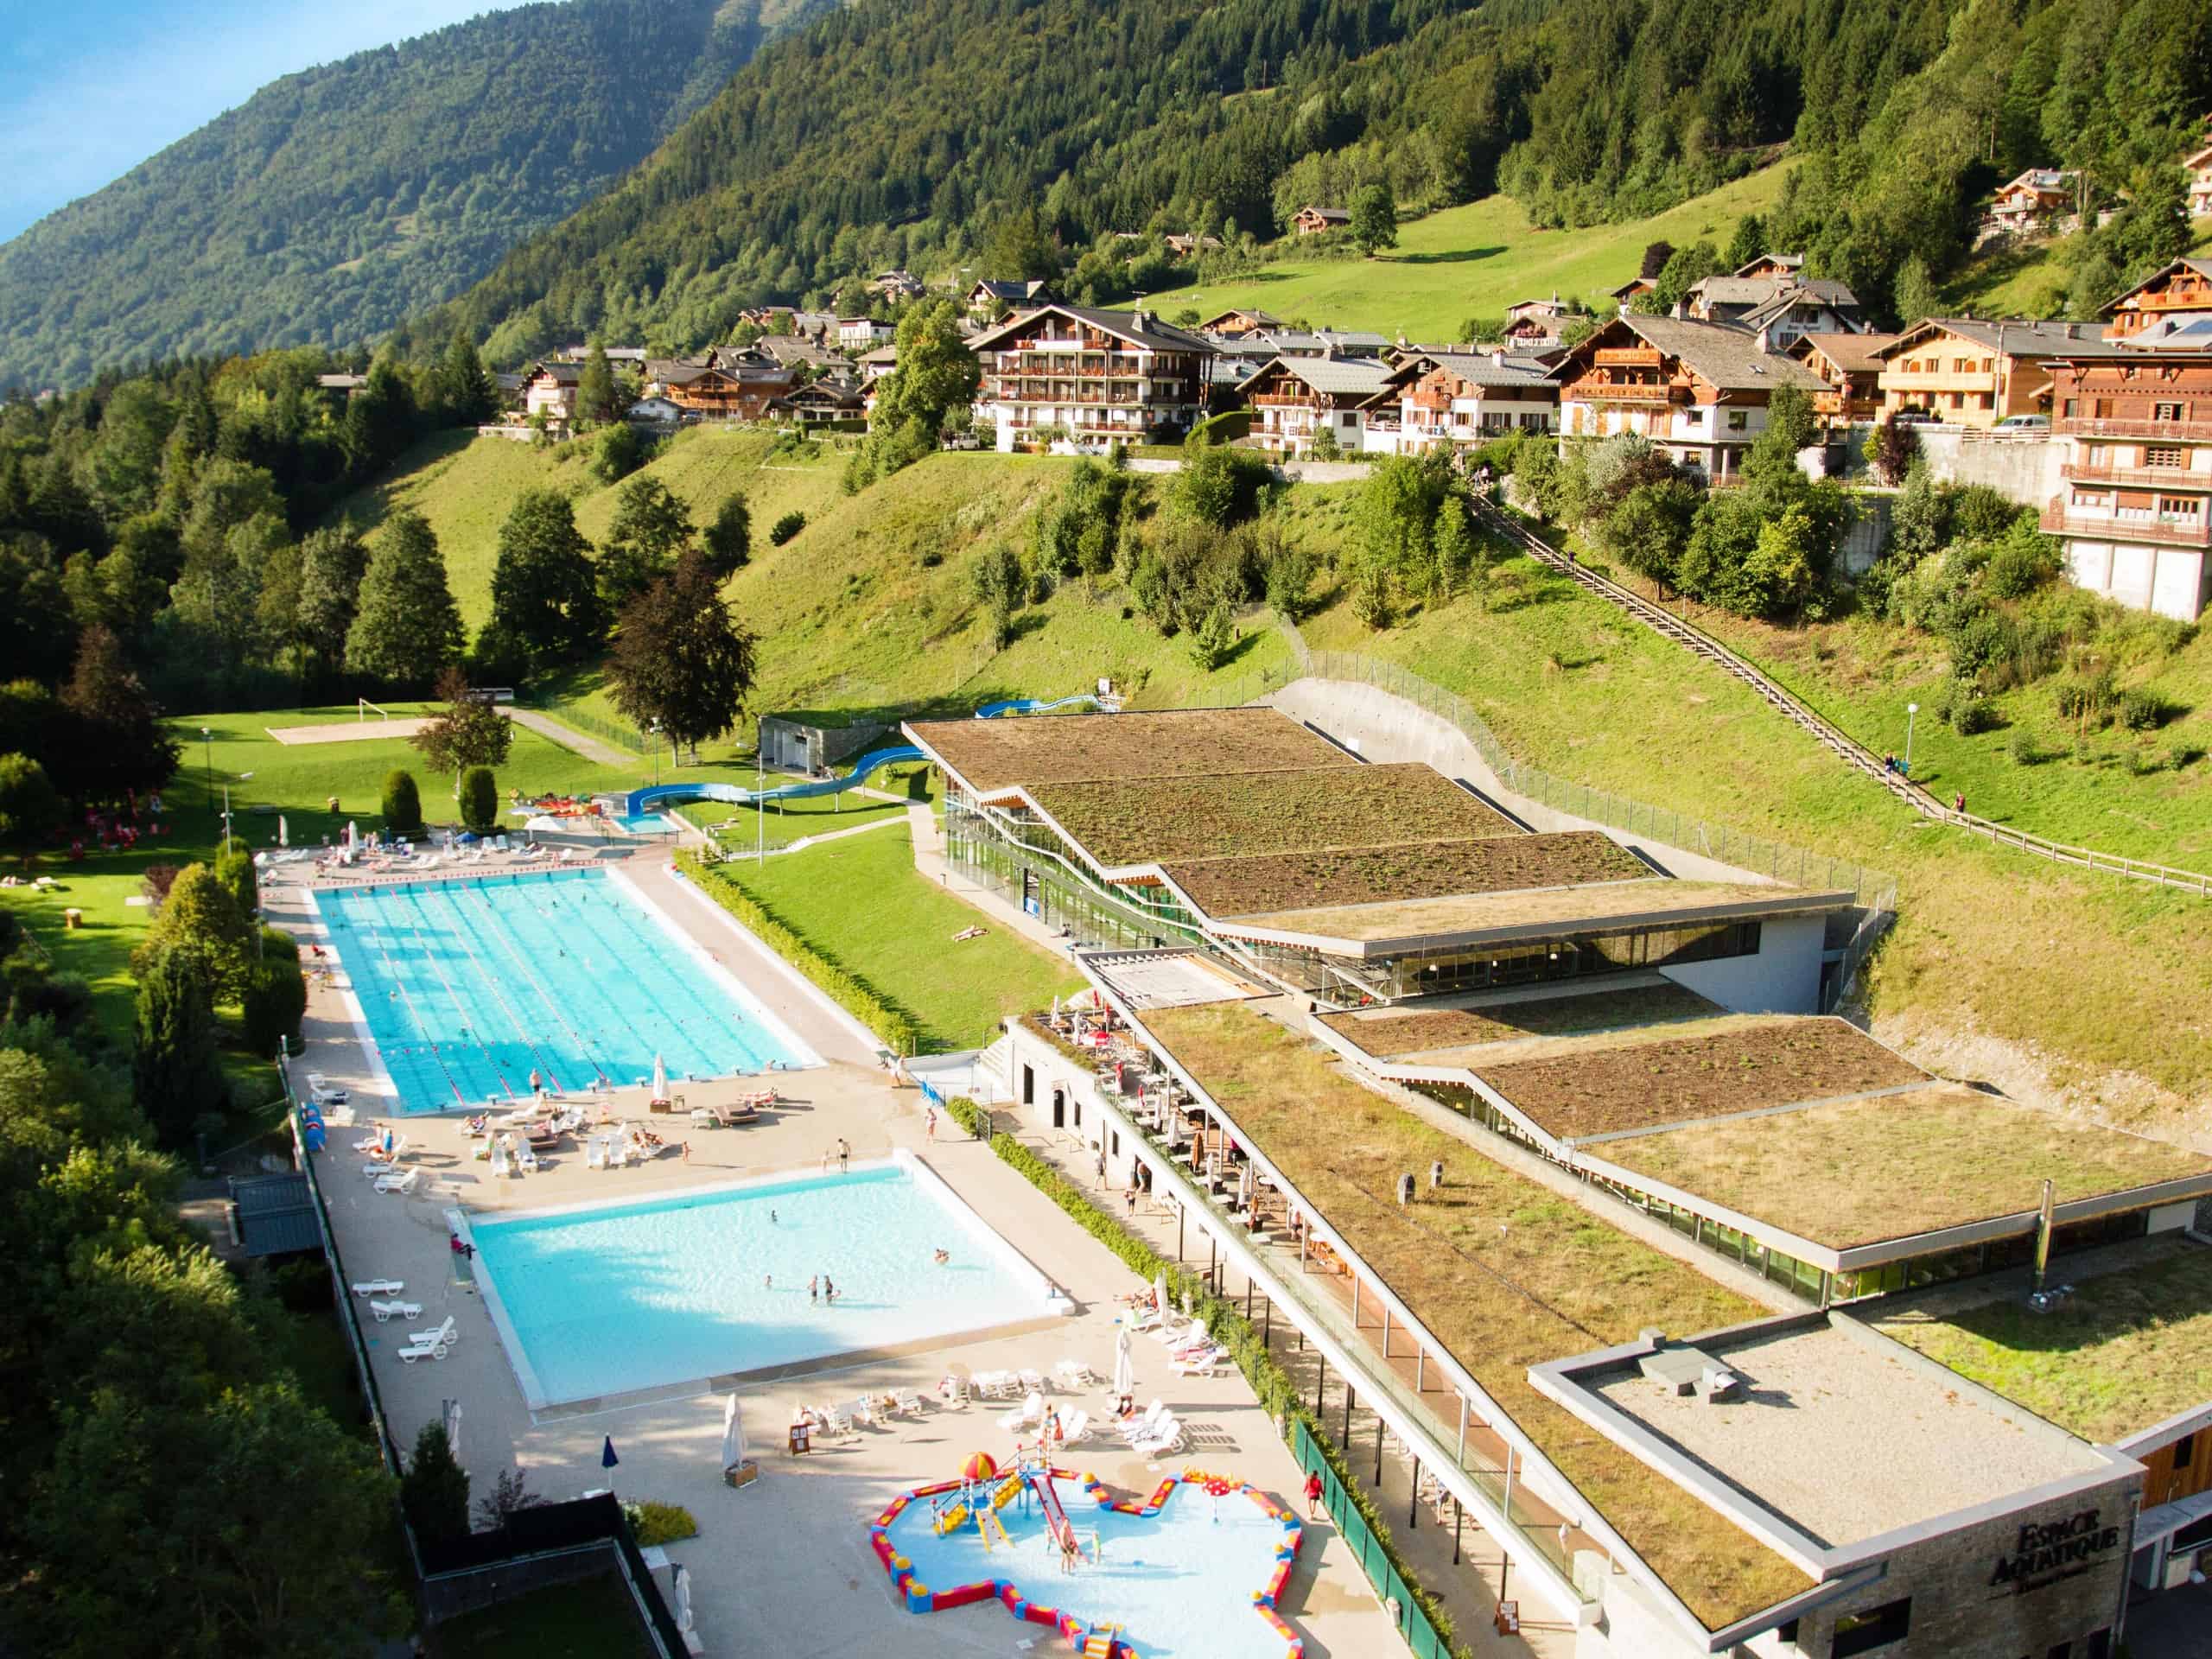 Top activities in Morzine away from the slopes: Take the plunge